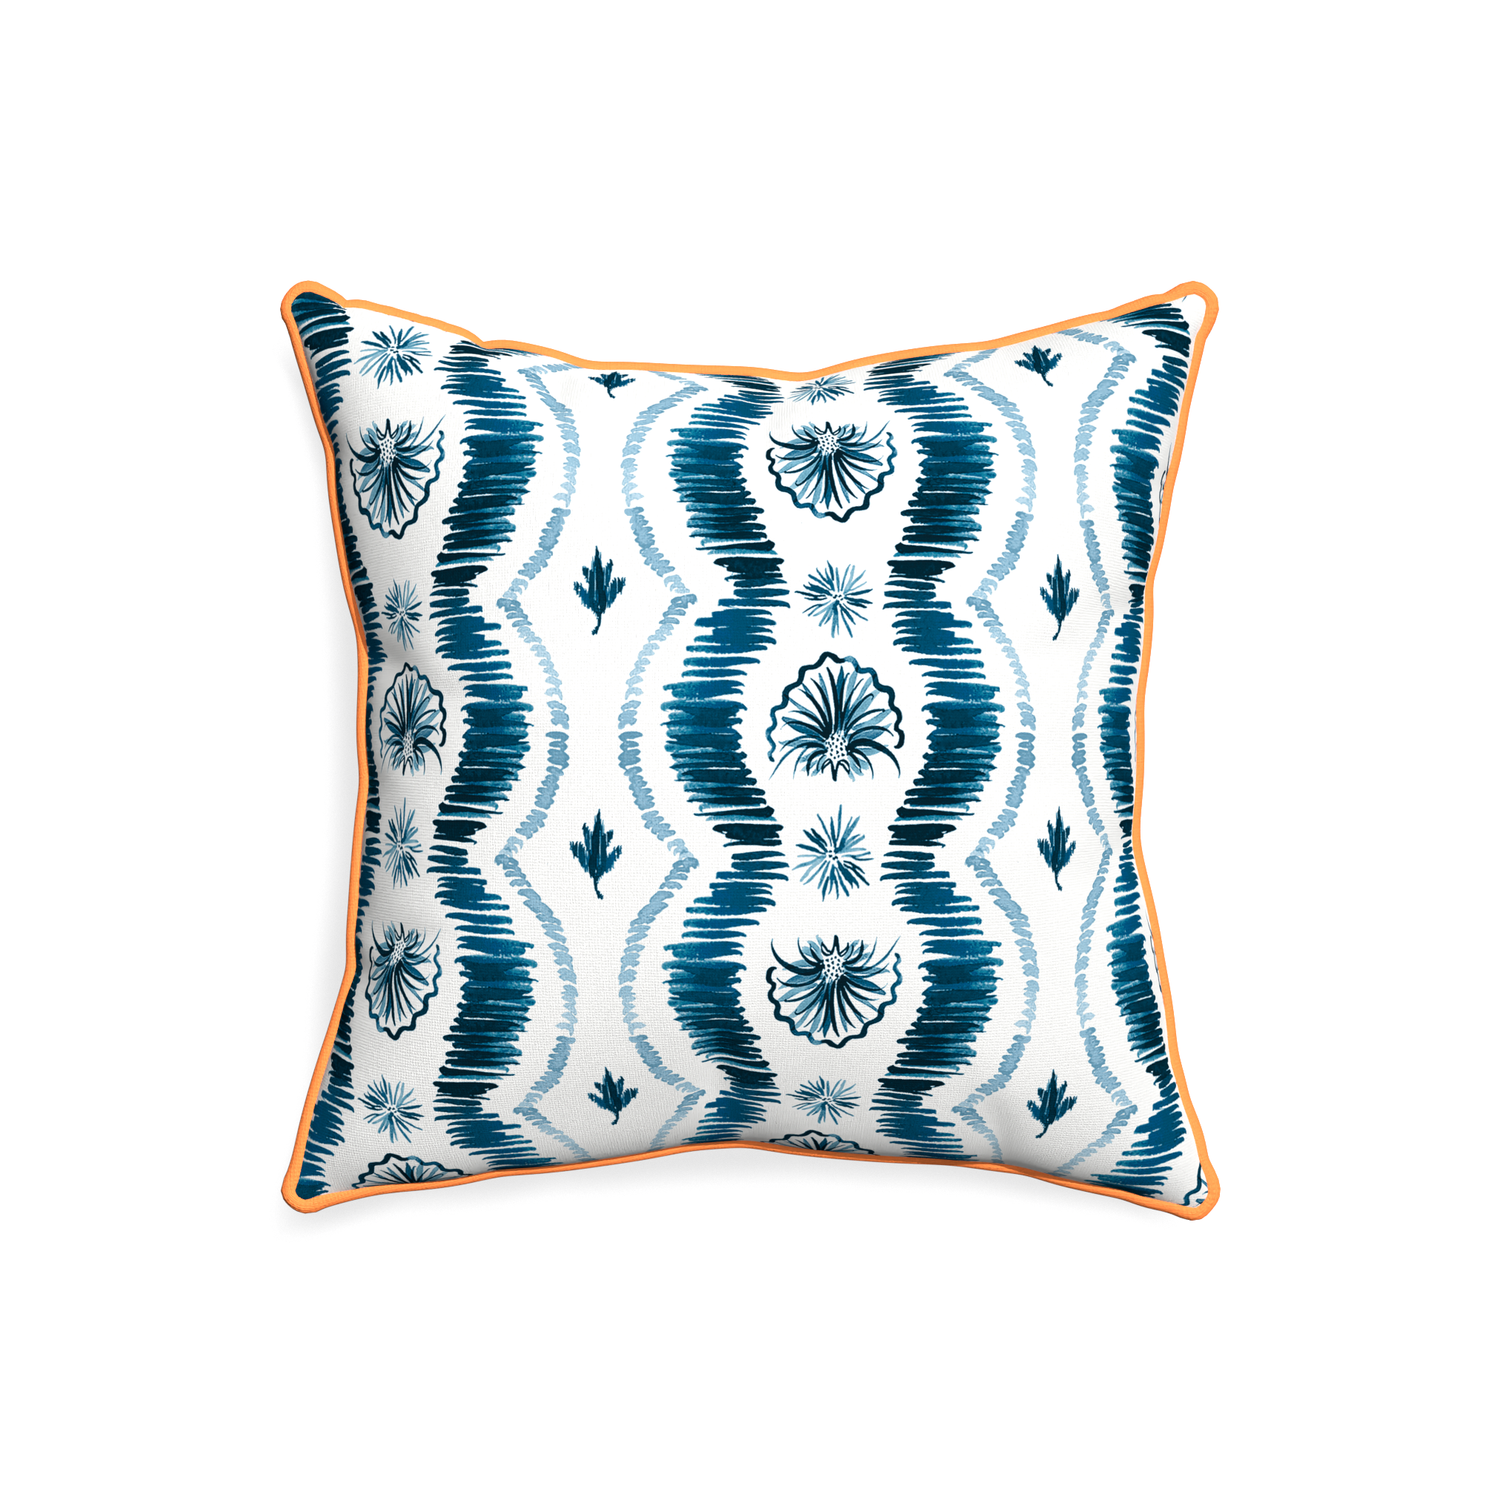 20-square alice custom blue ikatpillow with clementine piping on white background